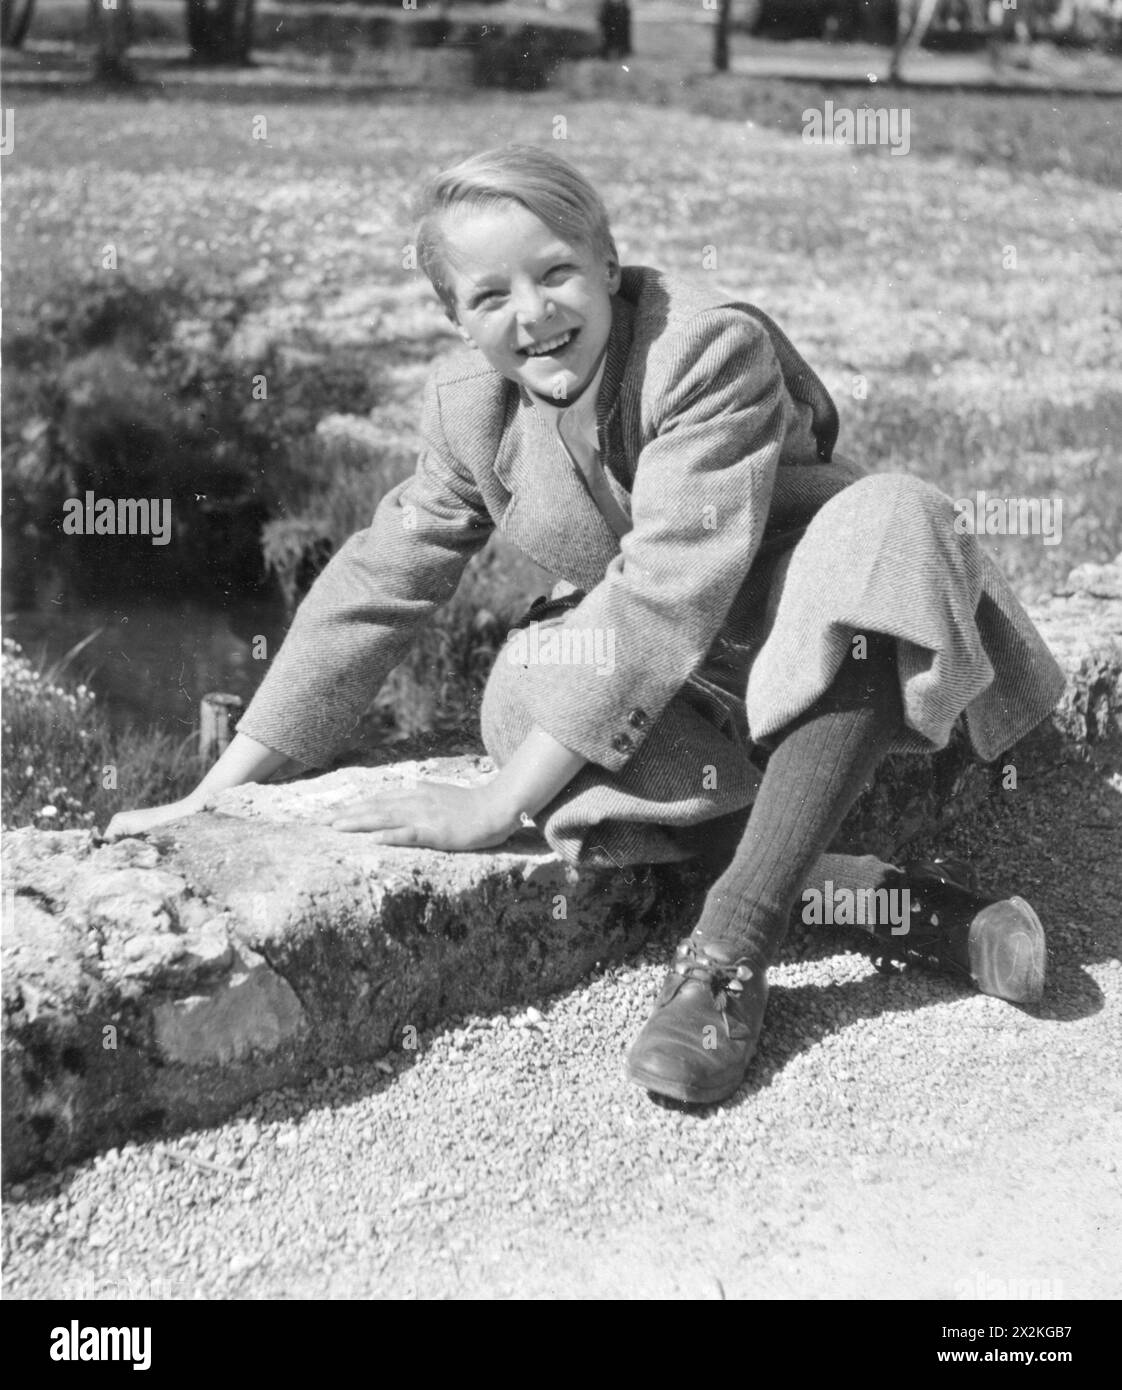 Schmoelcke, Werner, German photographer, as a child, circa 1930, ADDITIONAL-RIGHTS-CLEARANCE-INFO-NOT-AVAILABLE Stock Photo